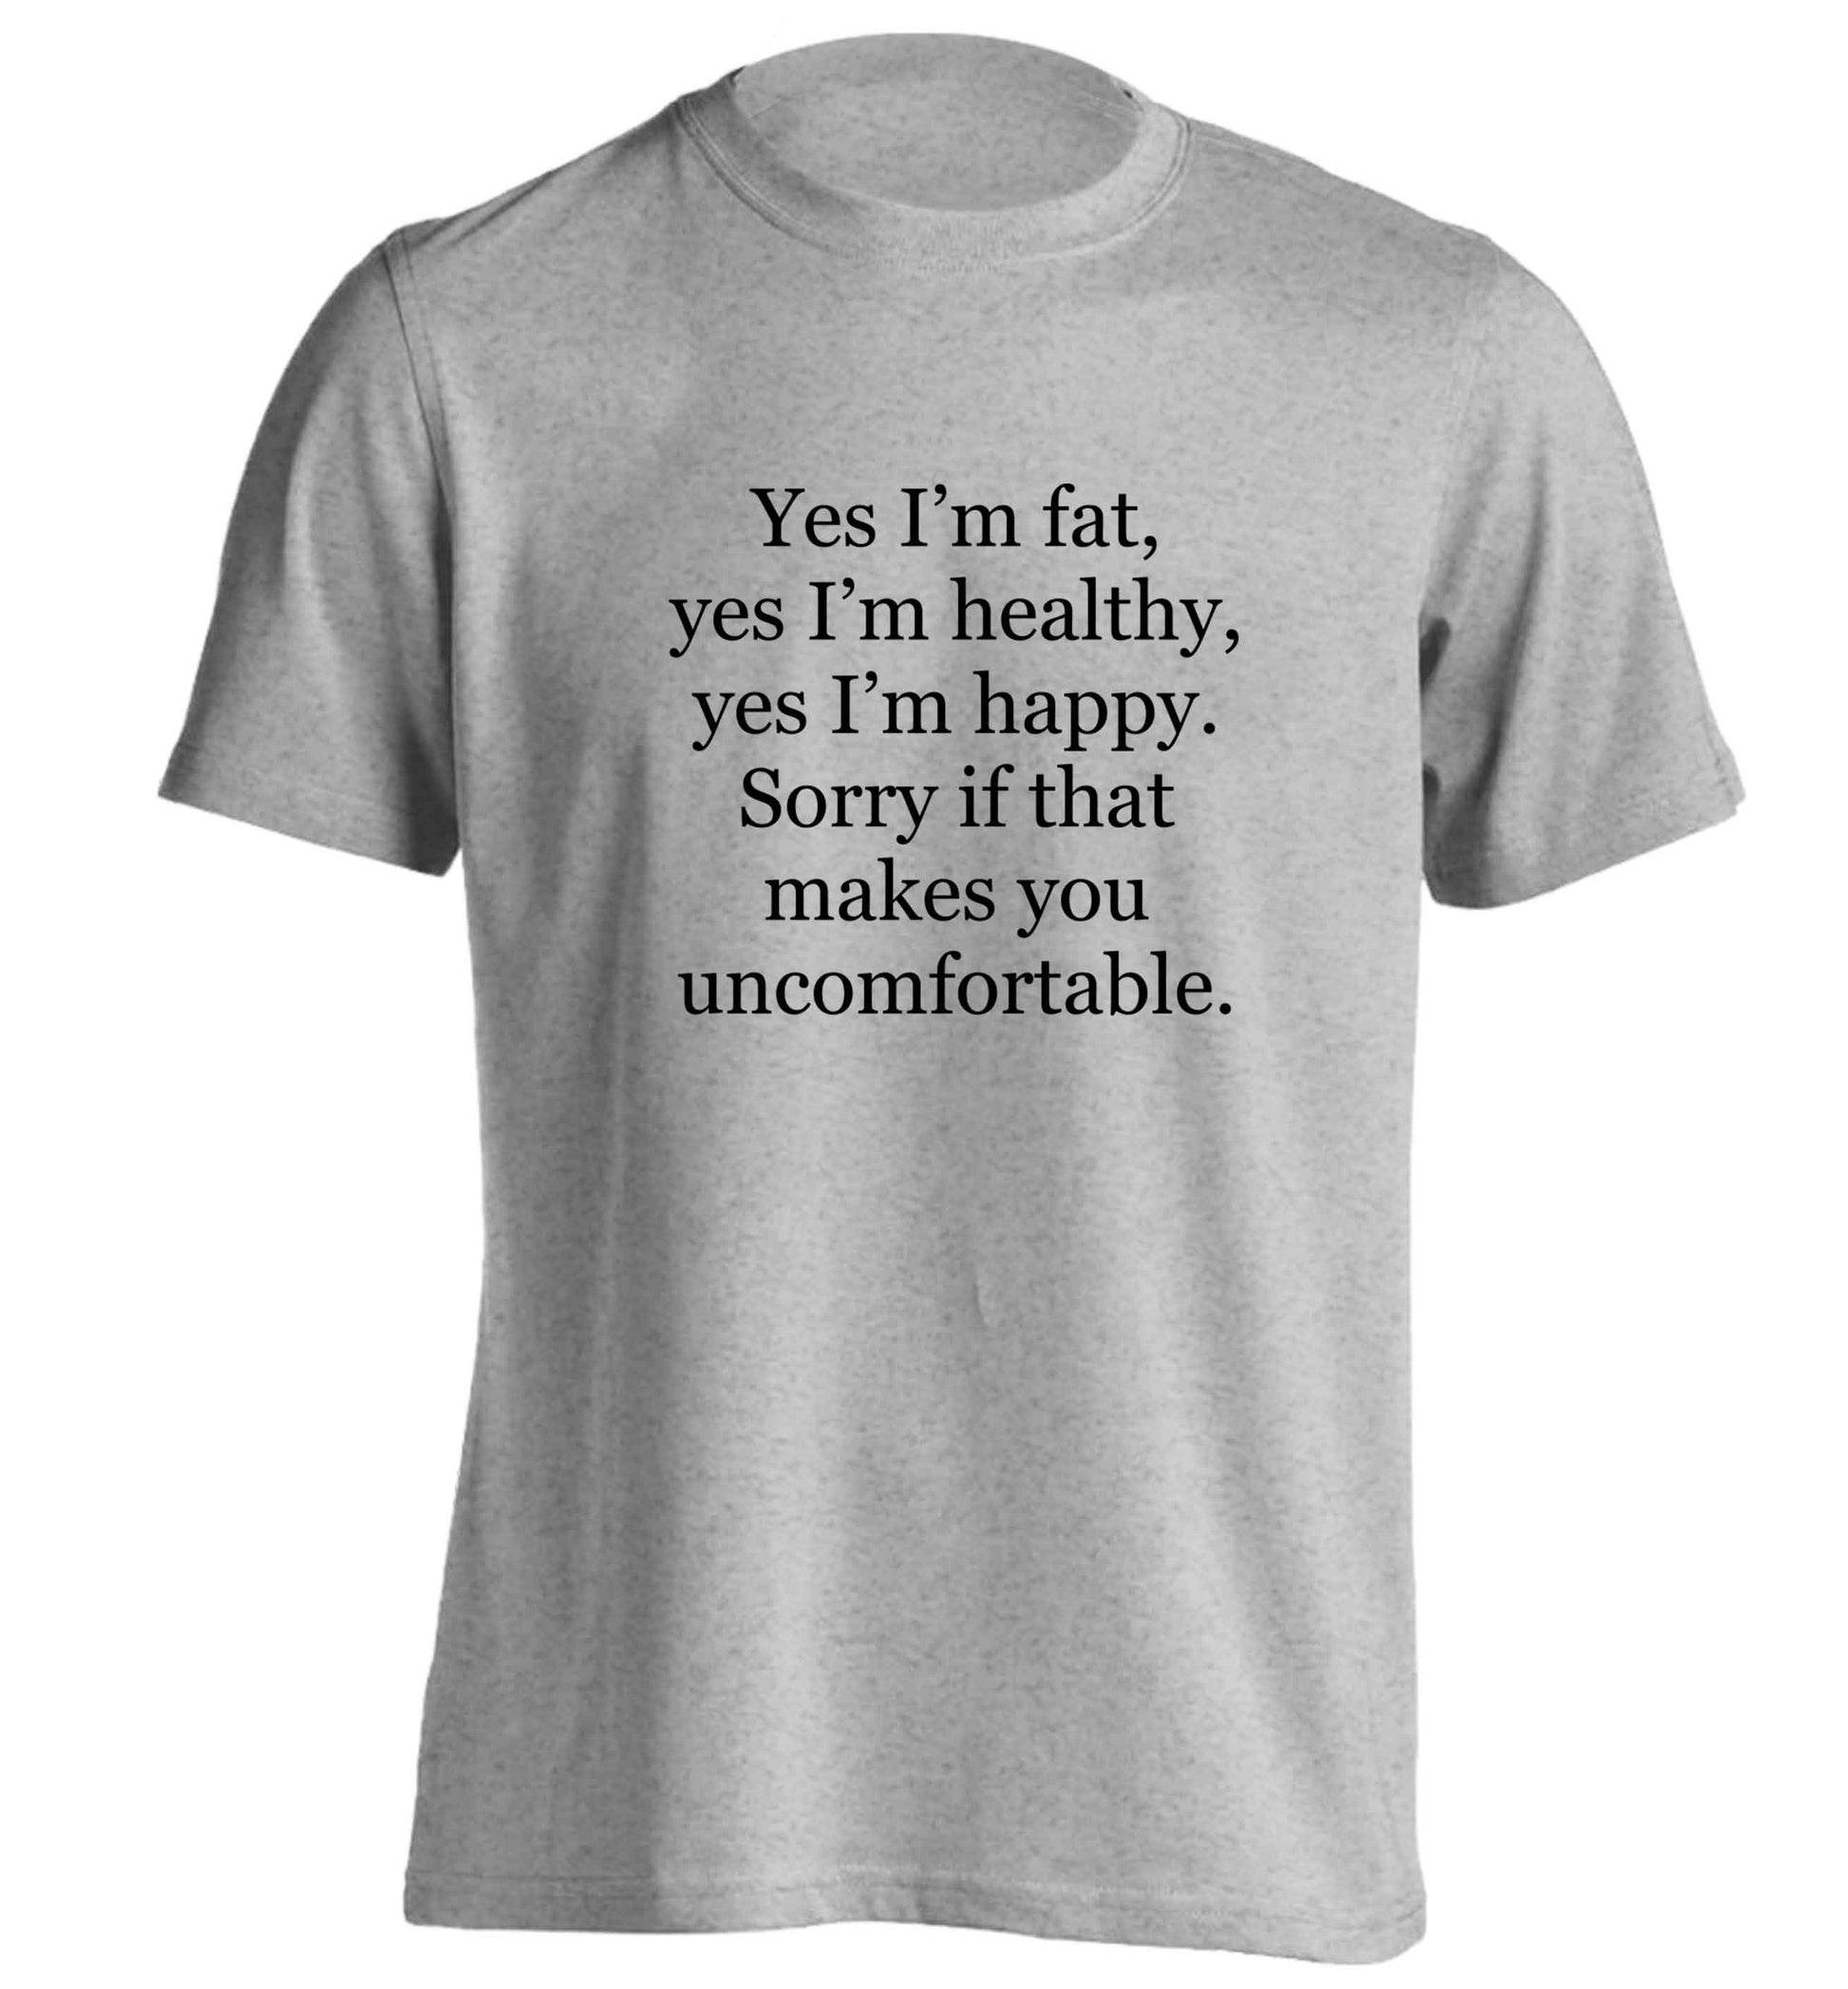 Yes I'm fat, yes I'm healthy, yes I'm happy. Sorry if that makes you uncomfortable adults unisex grey Tshirt 2XL